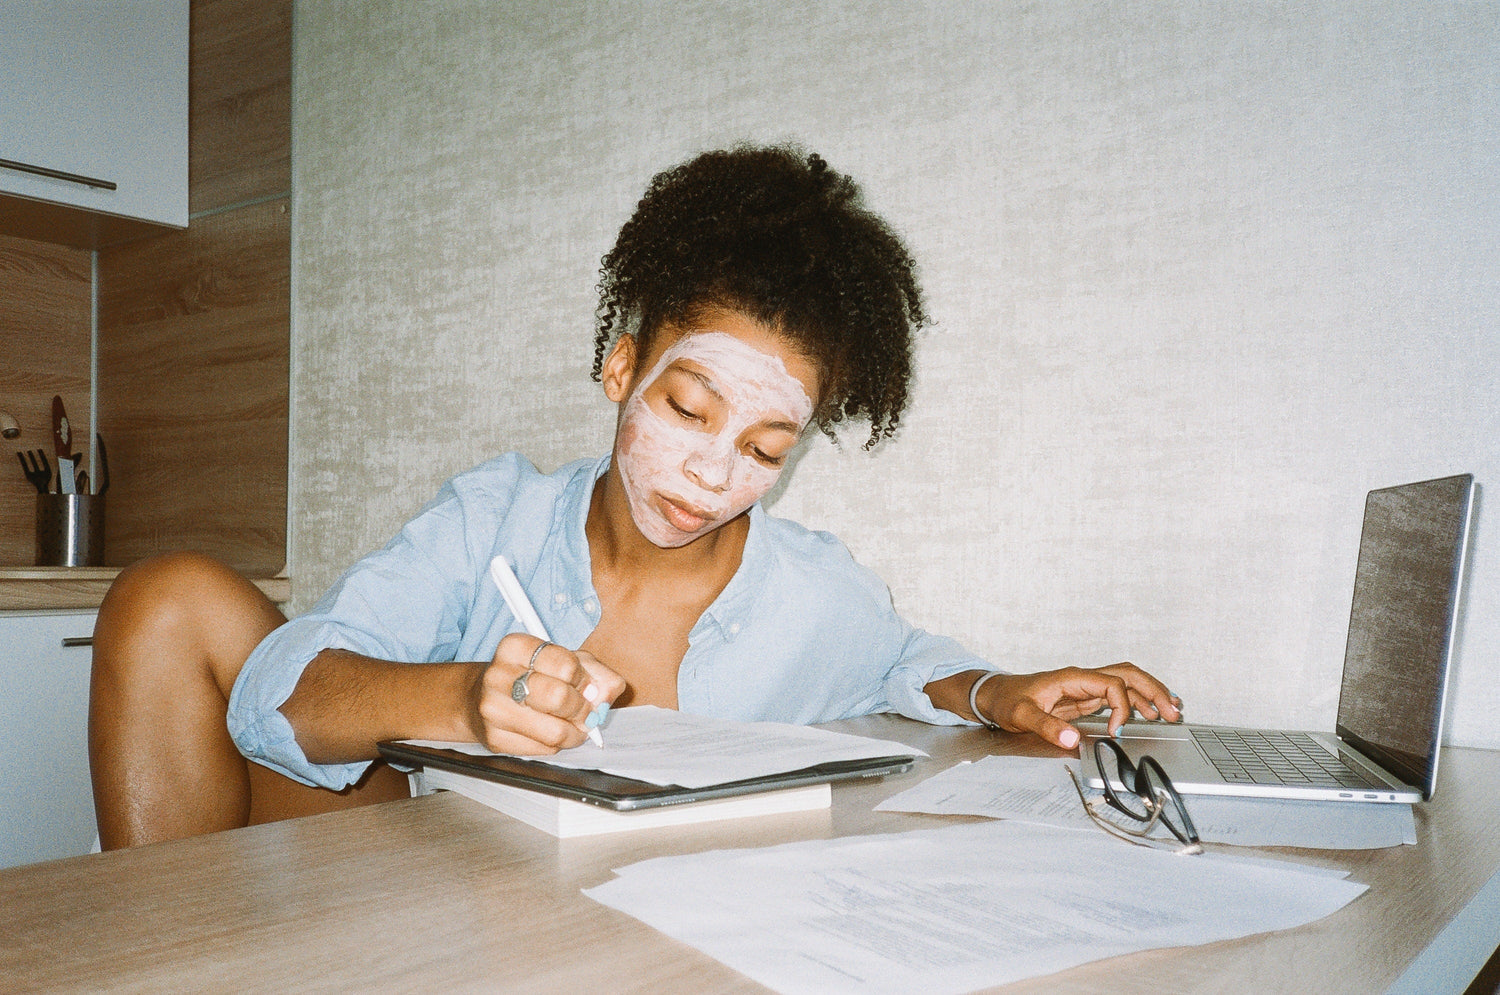 Picture of woman working from home in front of a laptop and making notes on a notepad while wearing her hair up and face mask on.